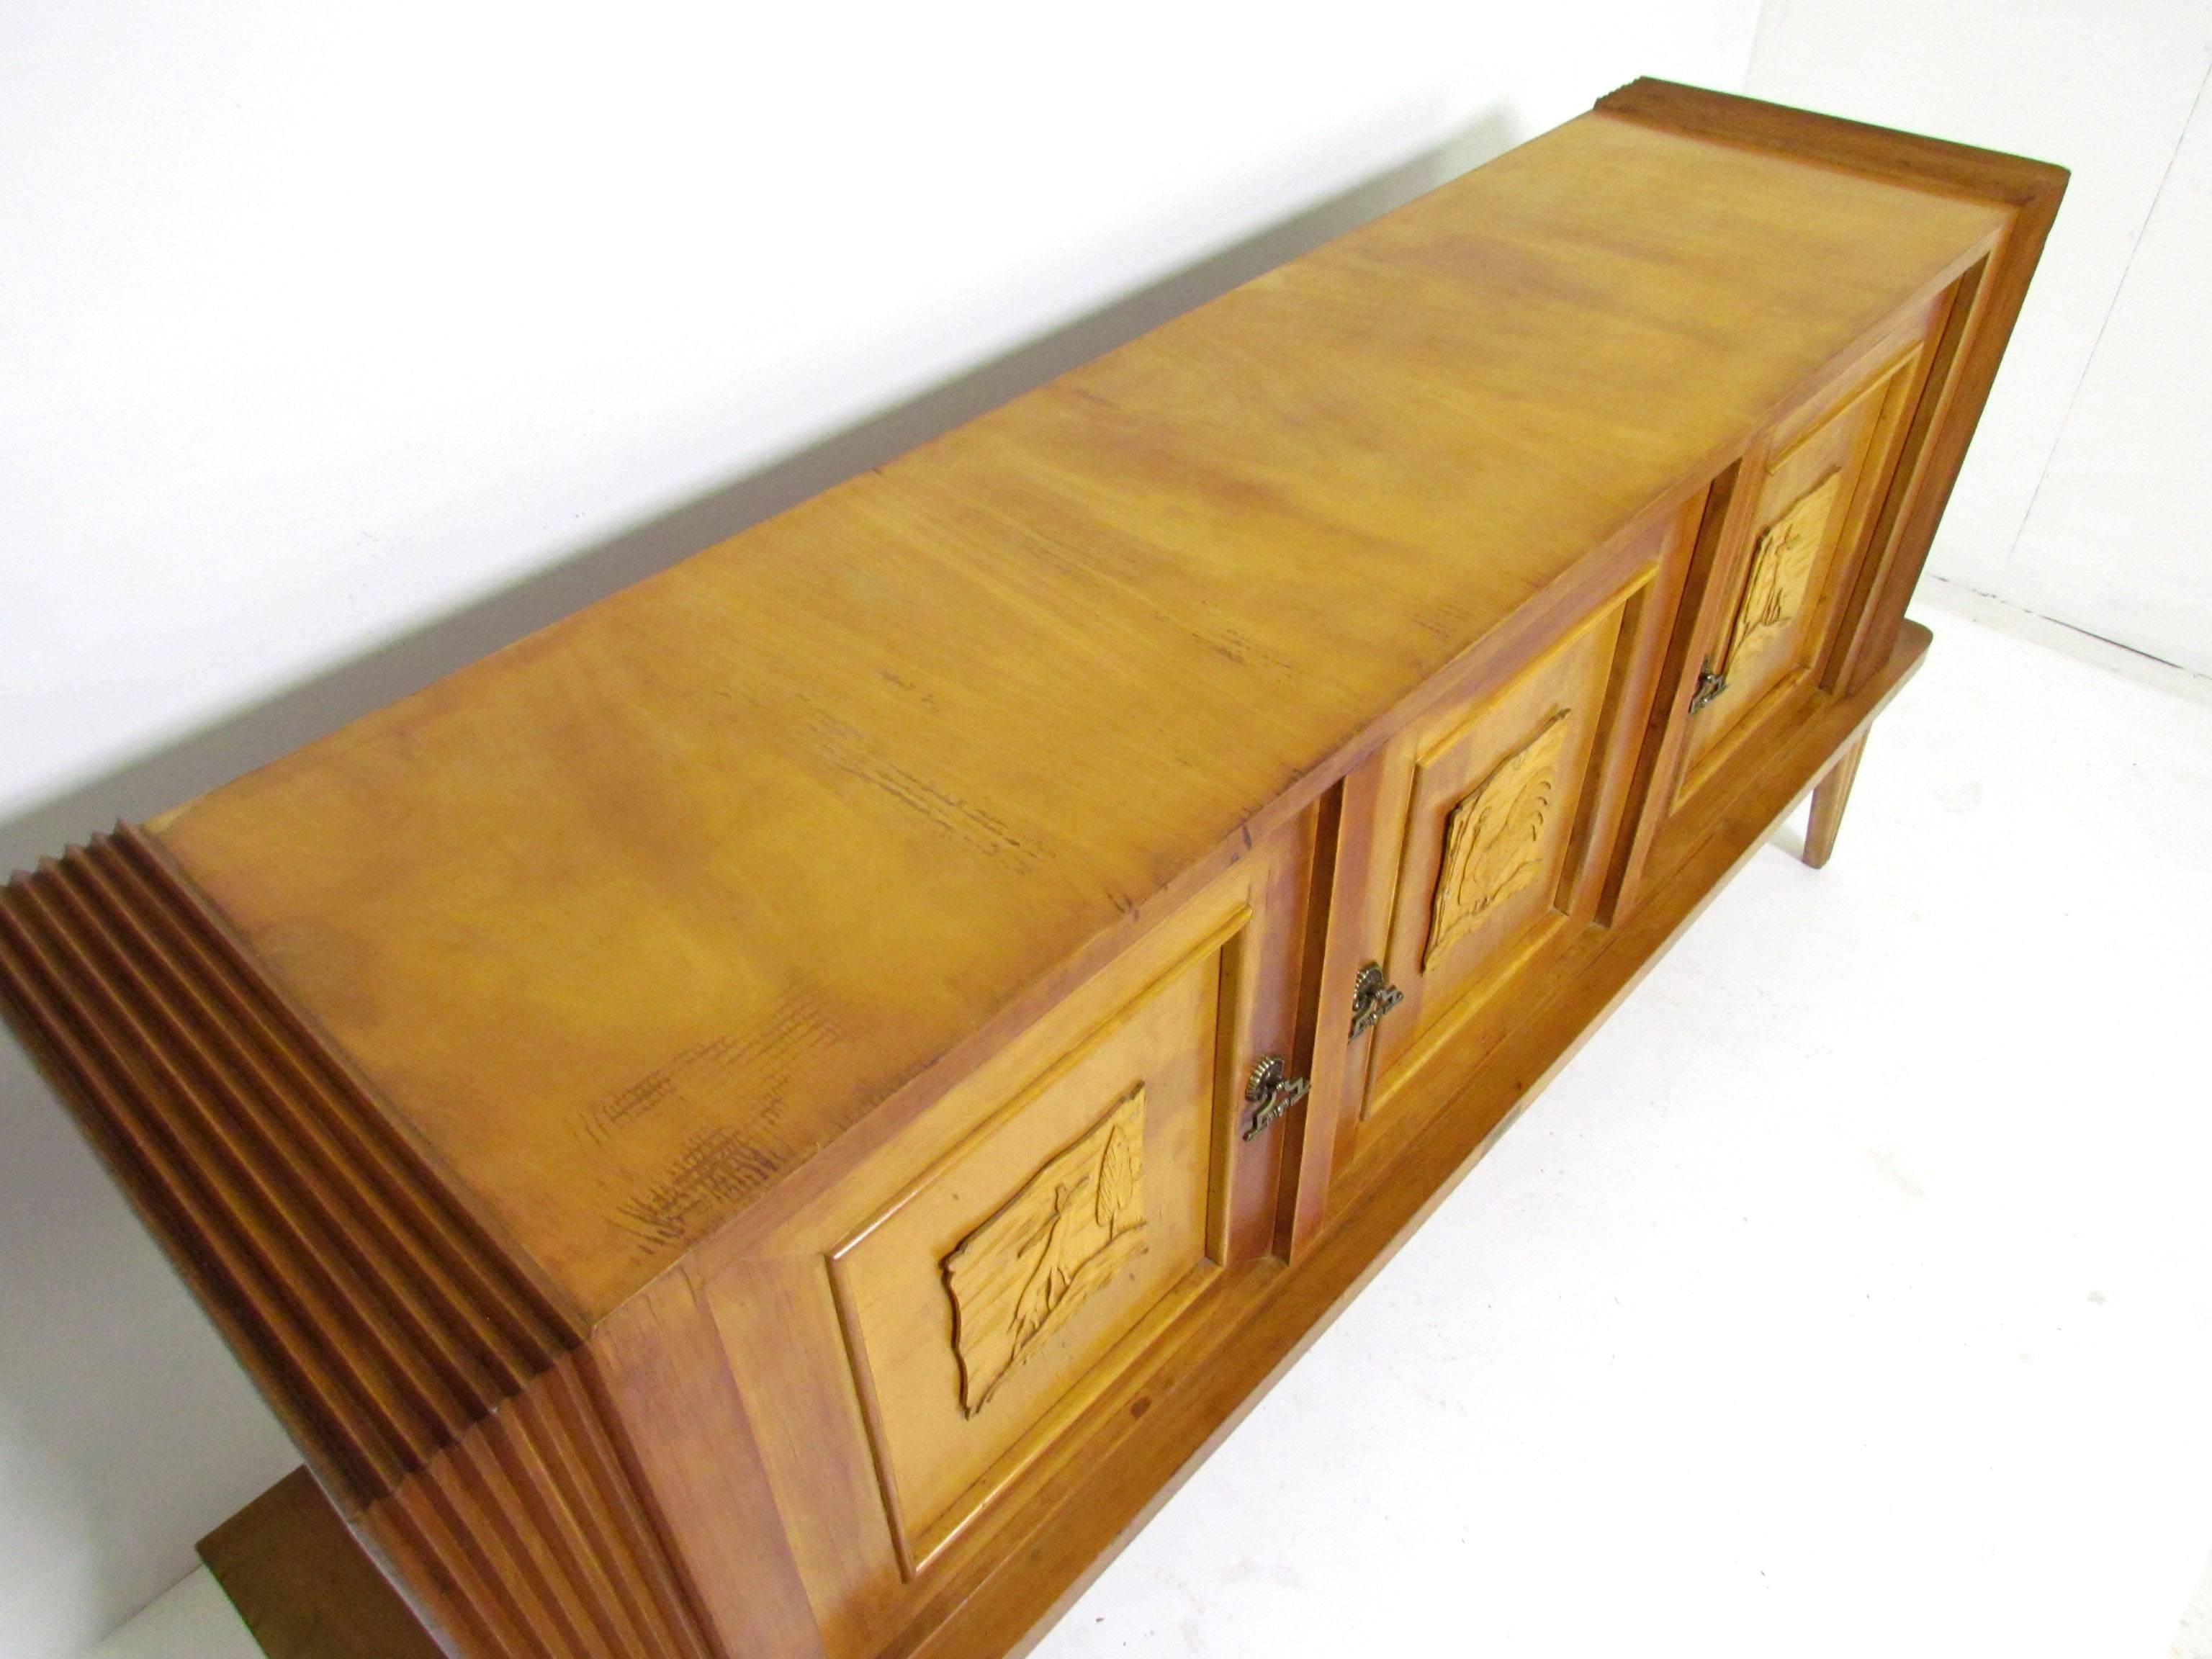 Italian Art Deco Sideboard with Hand-Carved Decorative Panels, circa 1940s 1